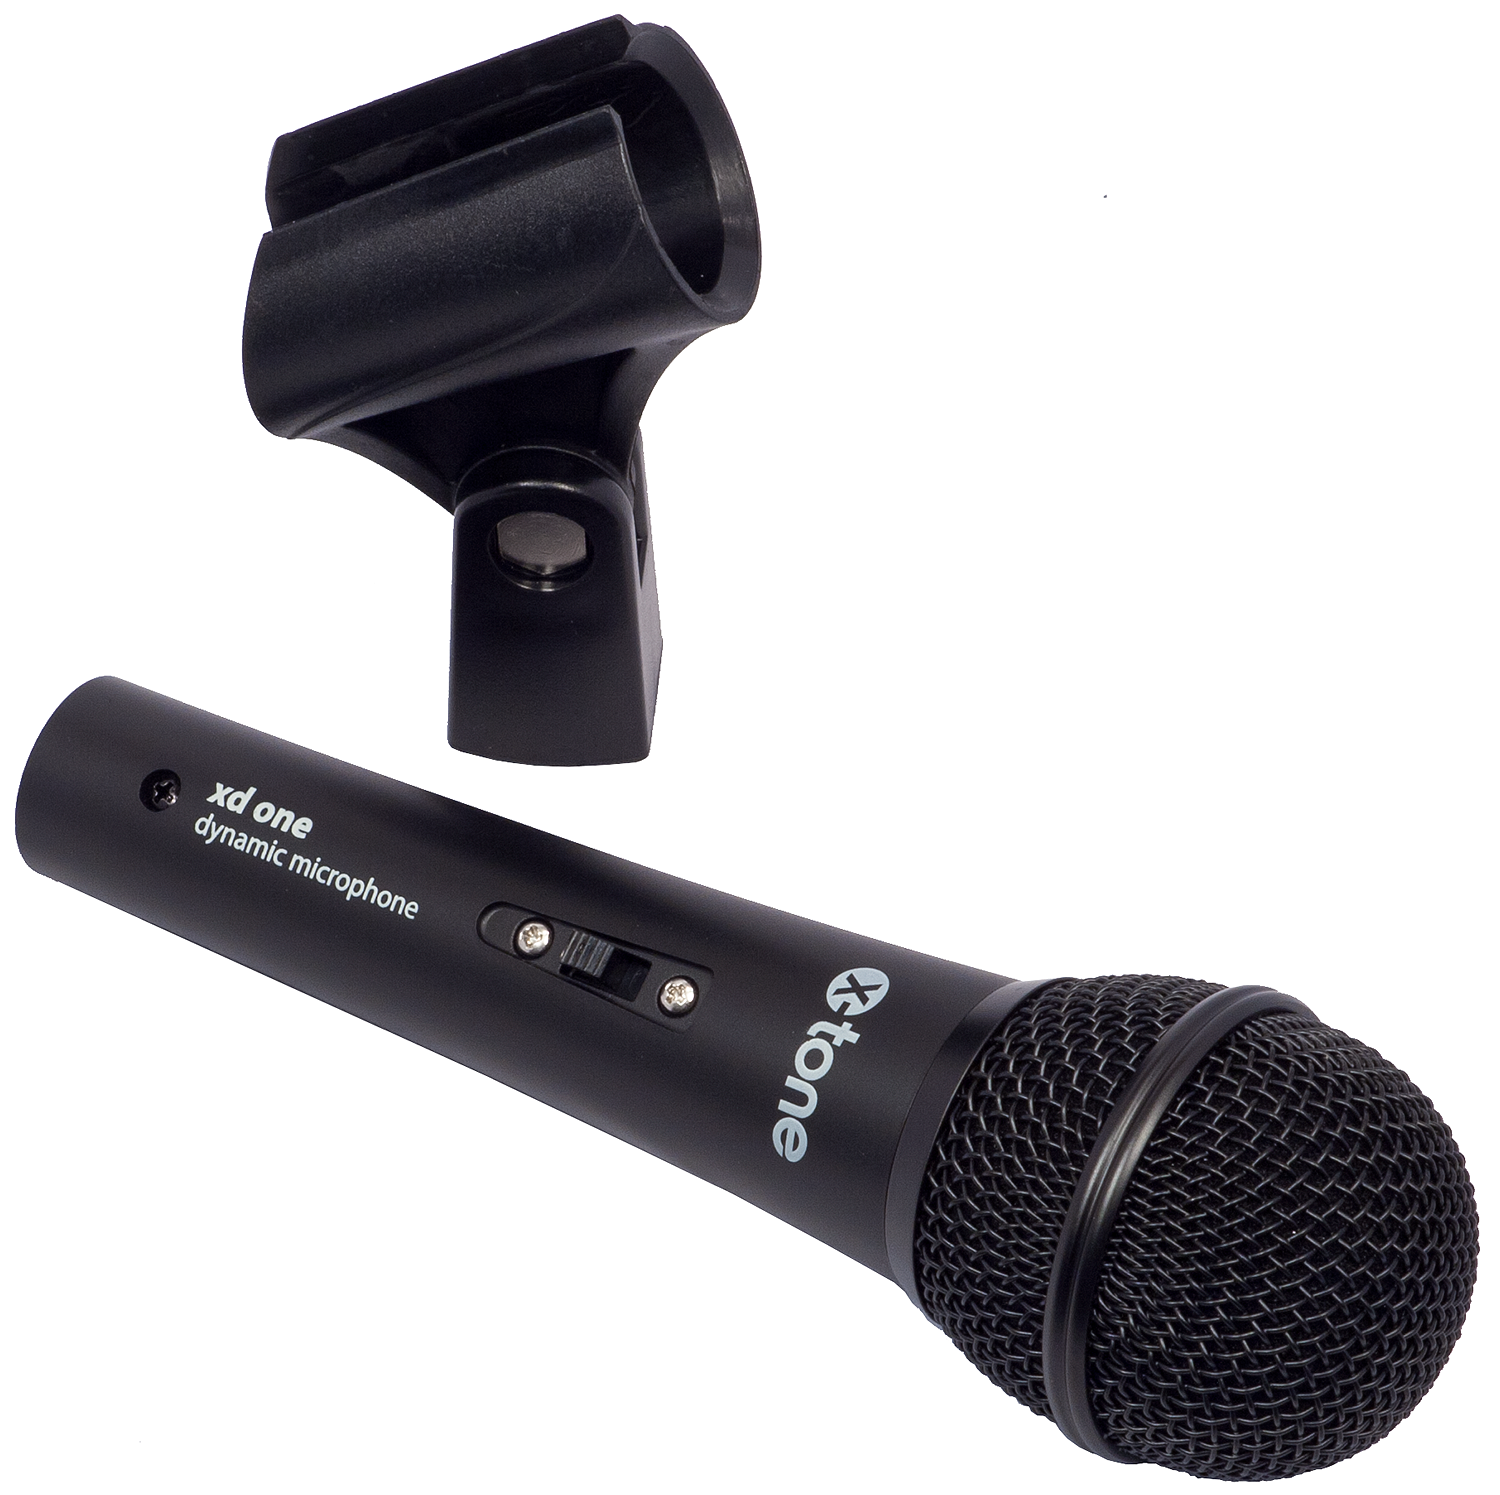 X-tone Xd-one - Vocal microphones - Main picture